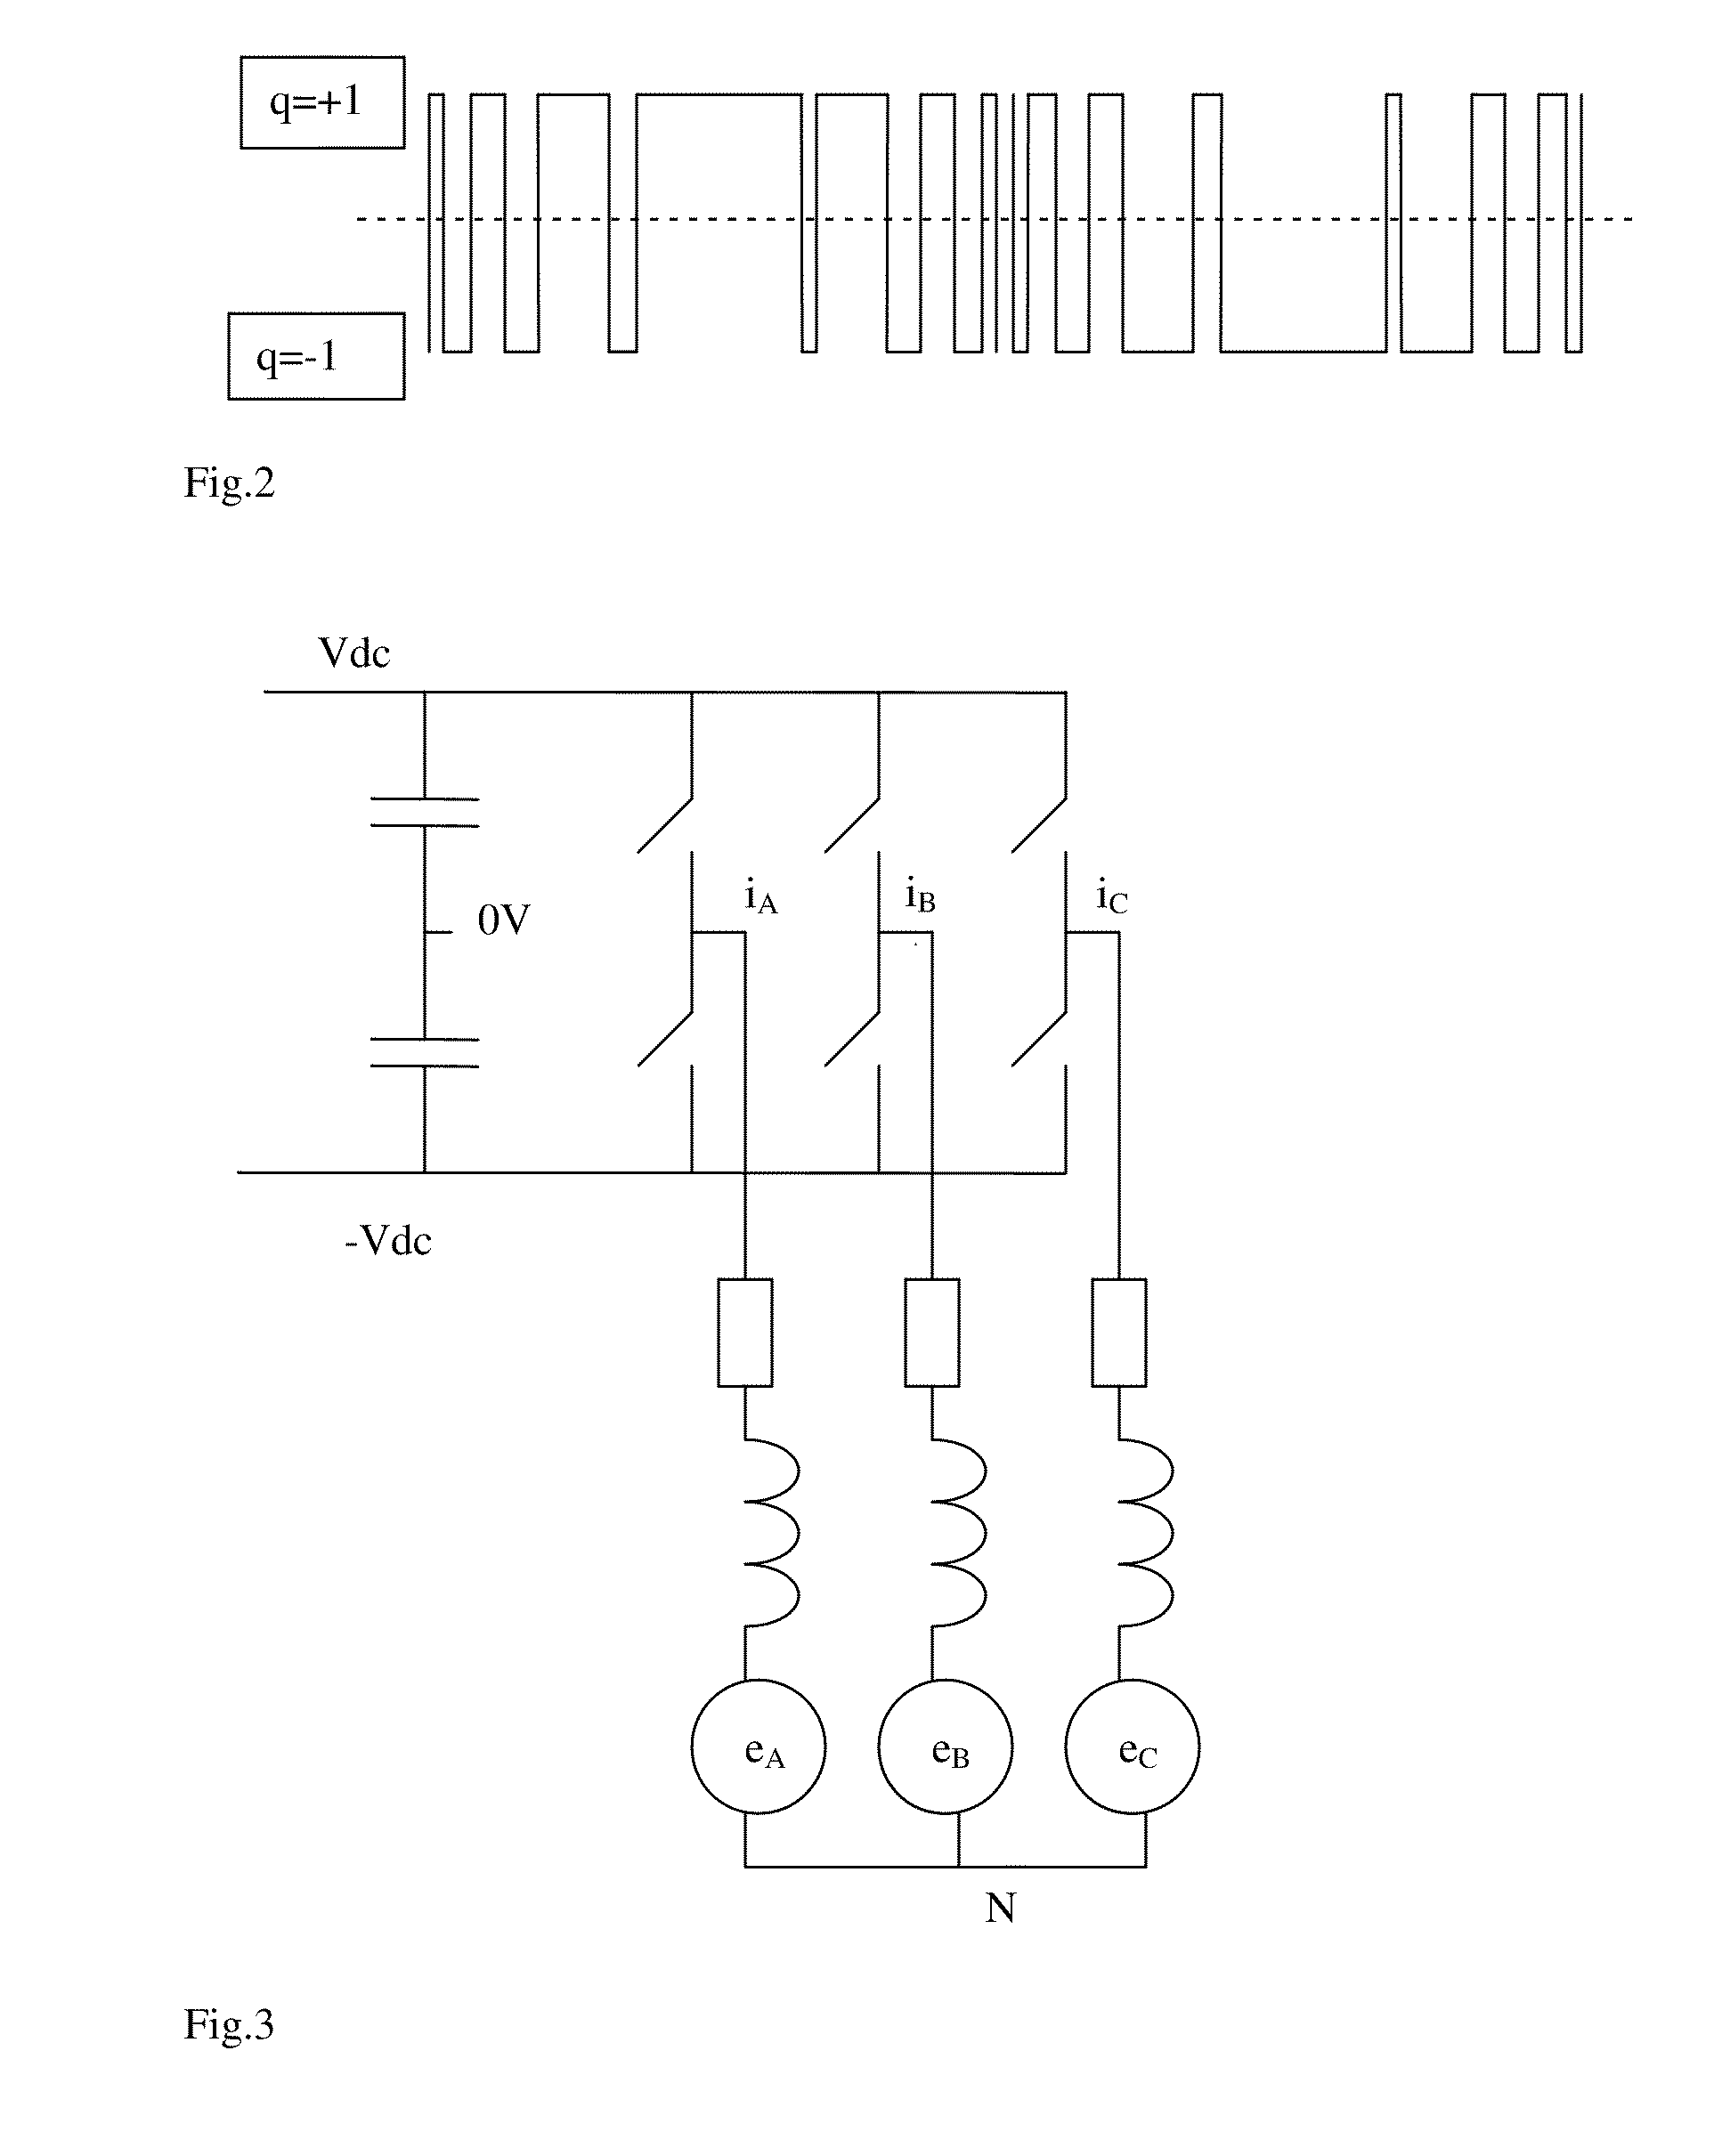 Apparatus and Method for Providing Information Relating to a Motor